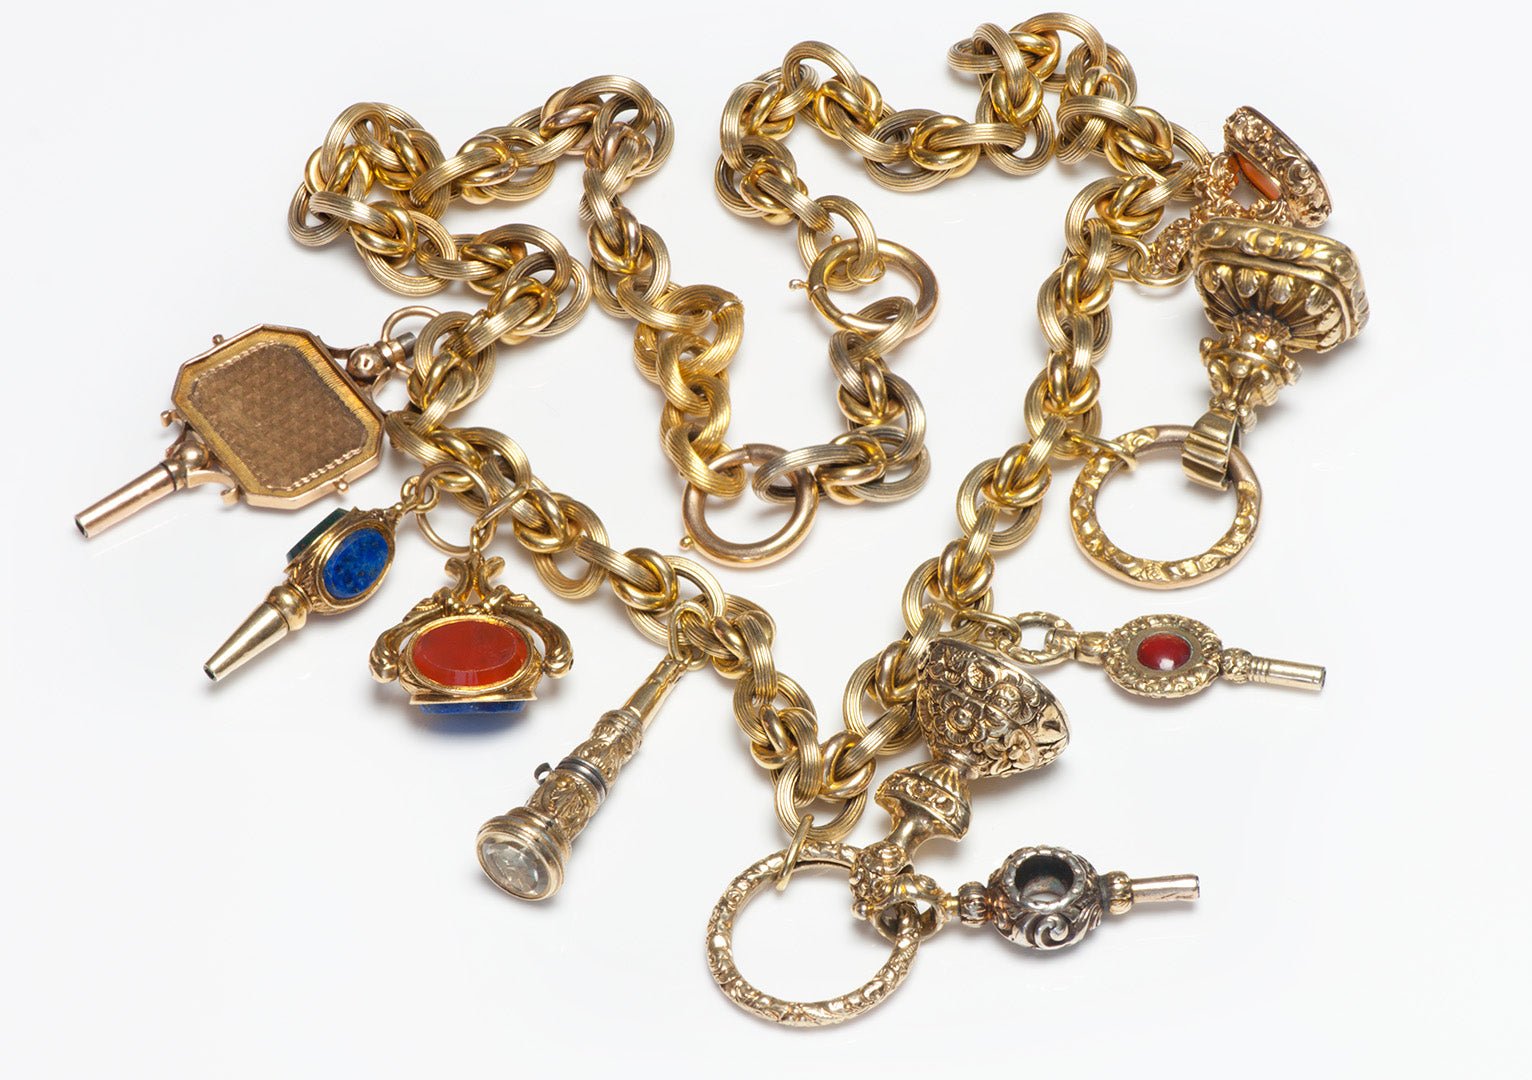 Antique Victorian Gold Necklace with Attached Fob Pendants